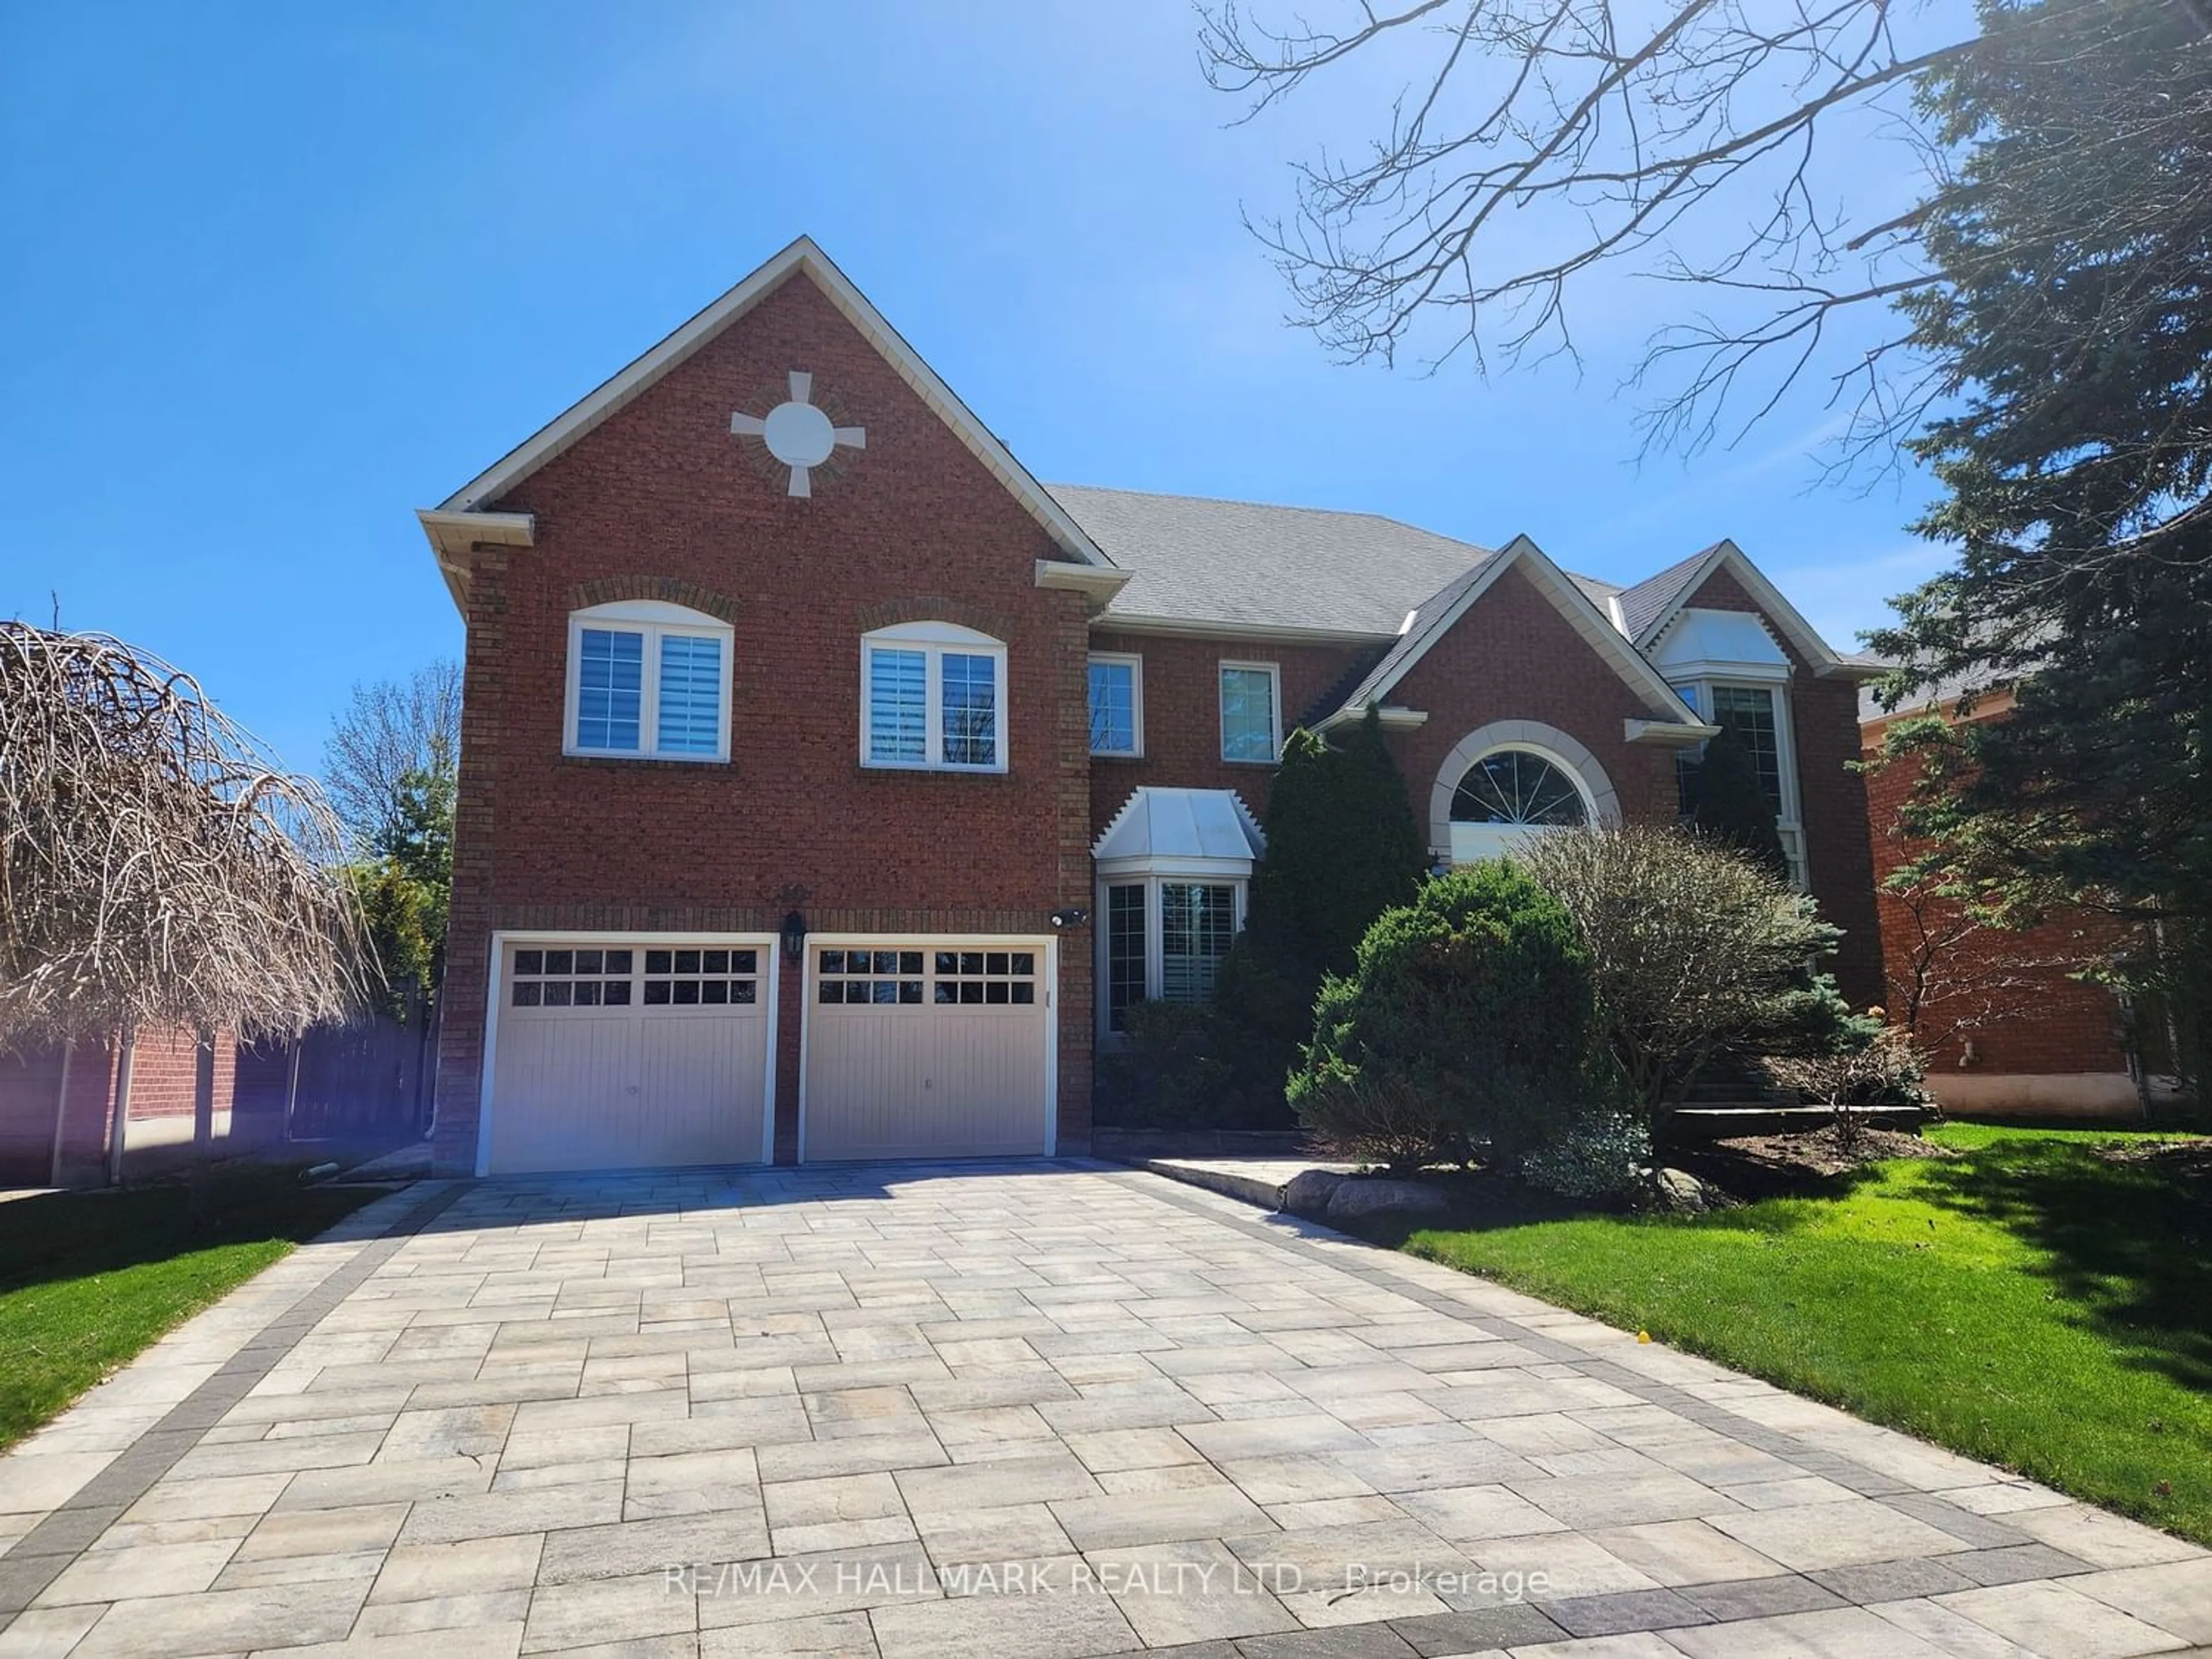 Home with brick exterior material for 10 Dunloe Rd, Richmond Hill Ontario L4B 2H5